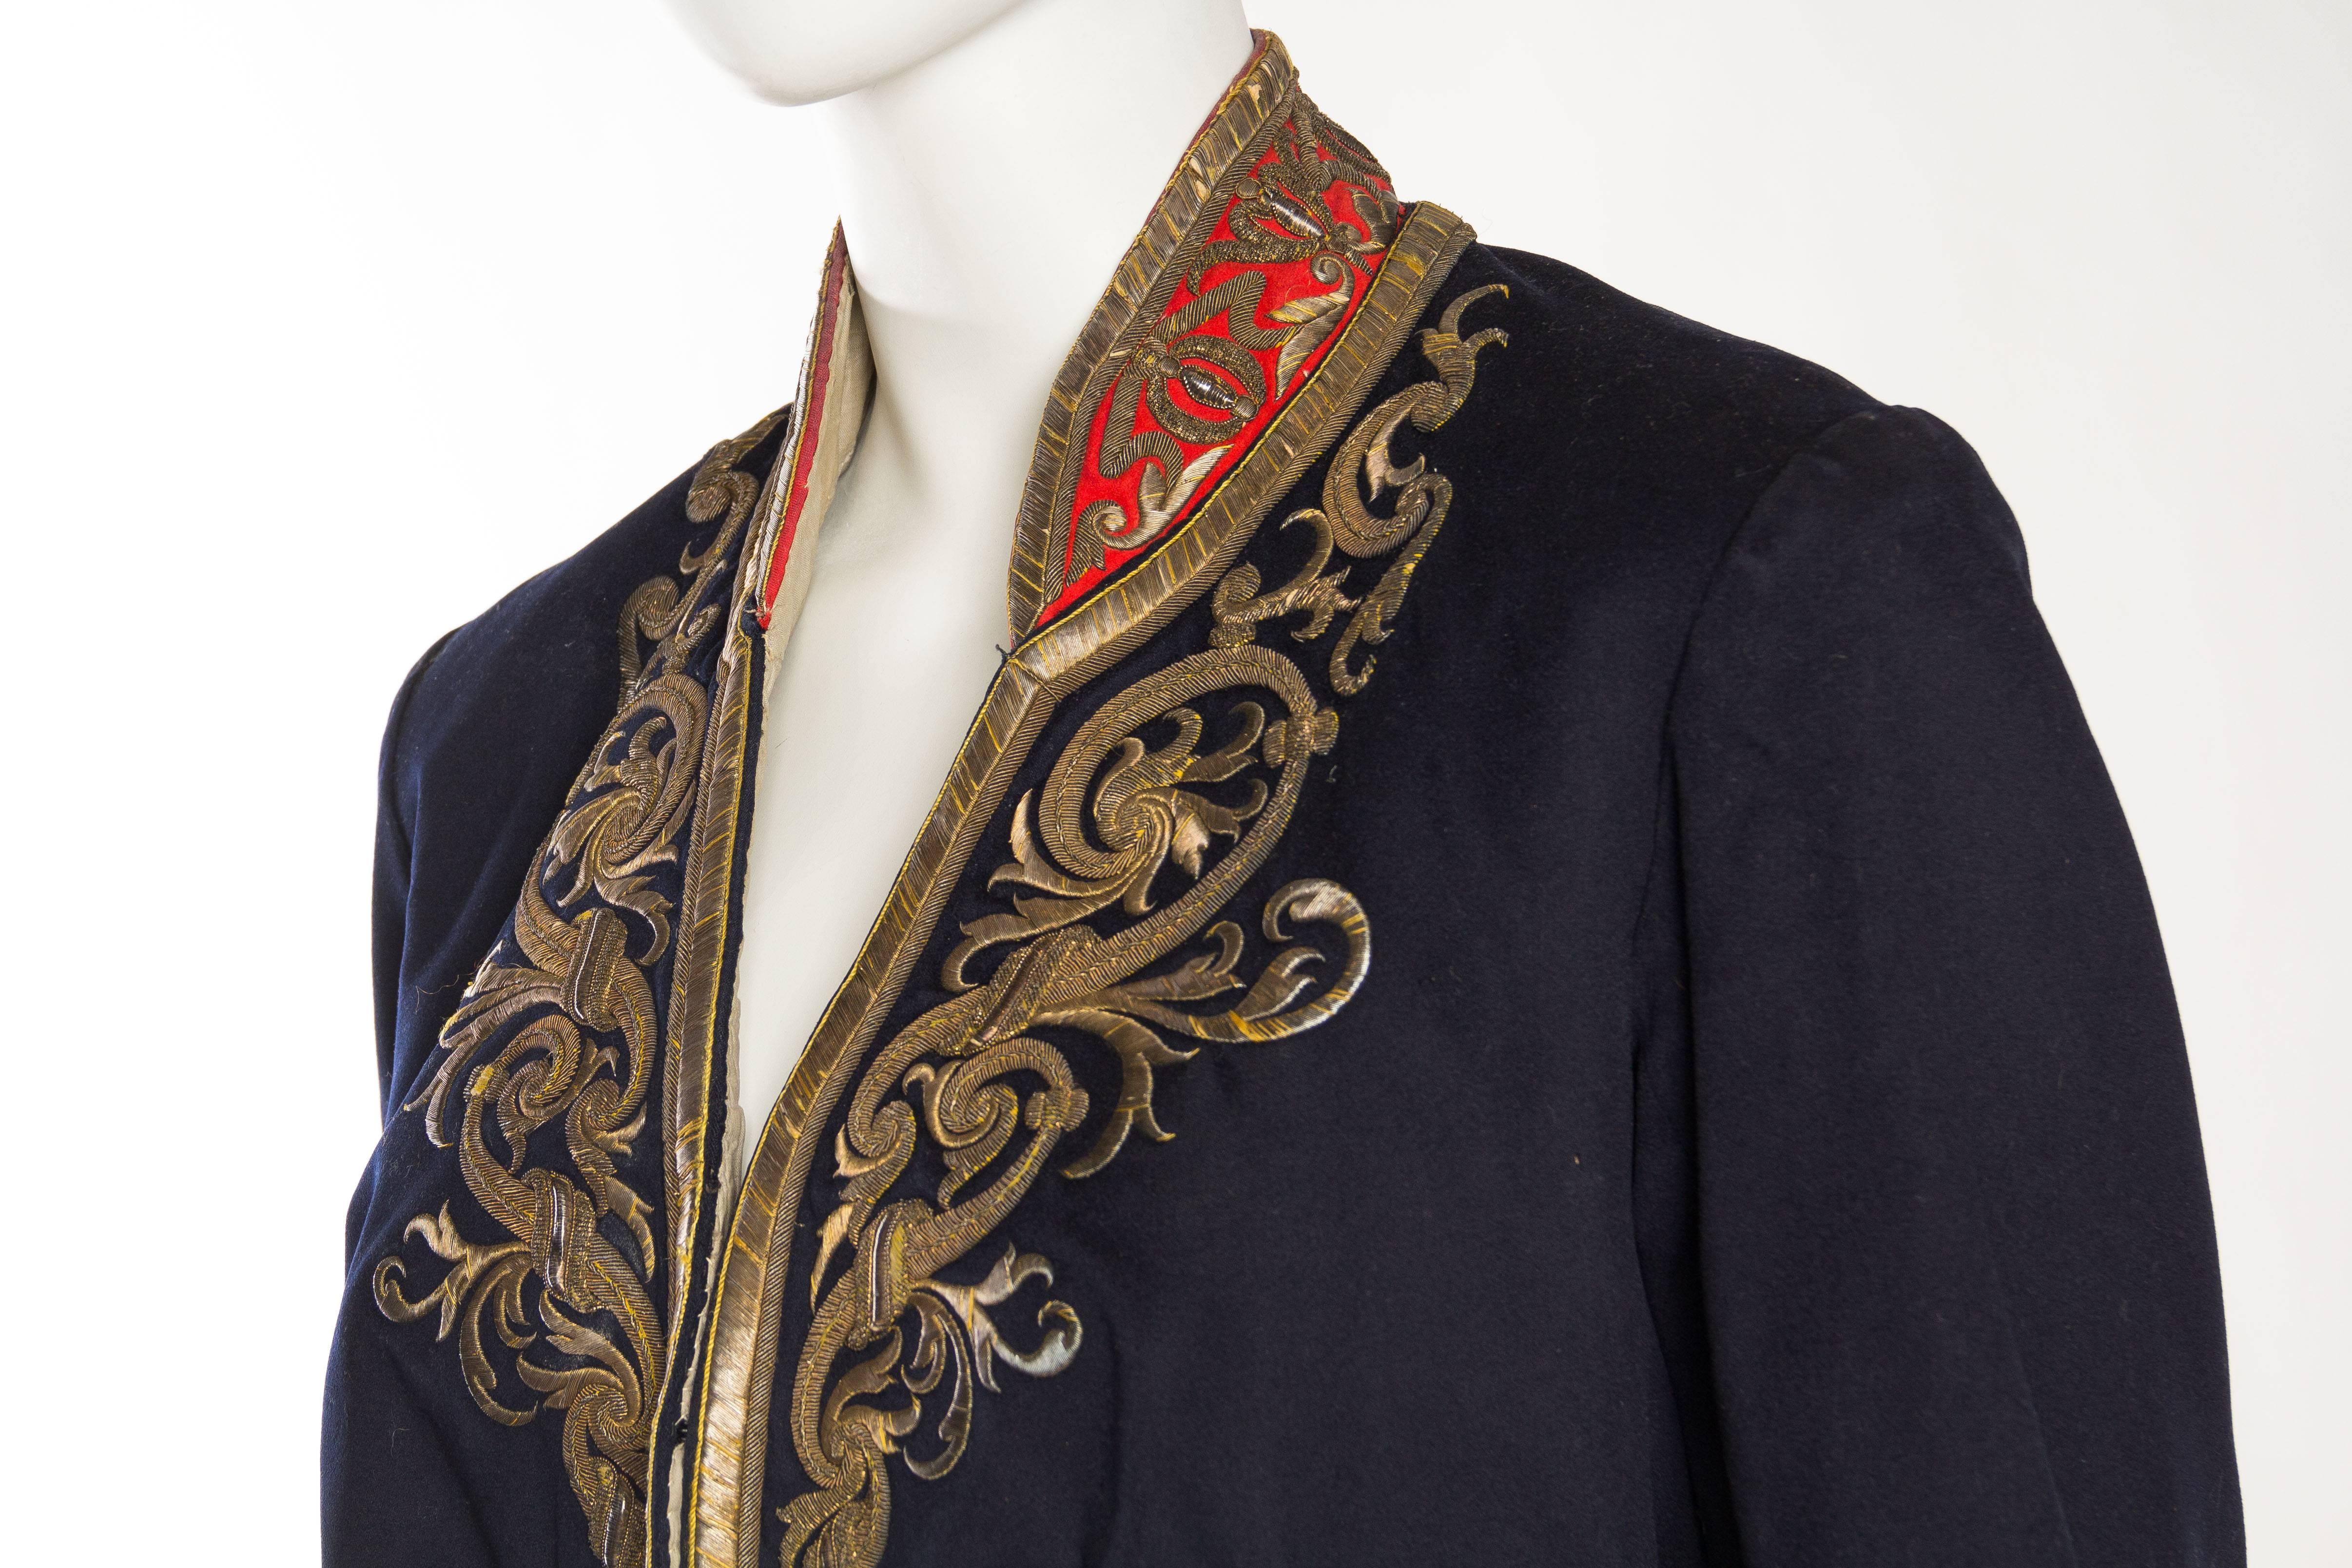 Women's or Men's Victorian Livery Frock Coat with Antique Gold Embroidery